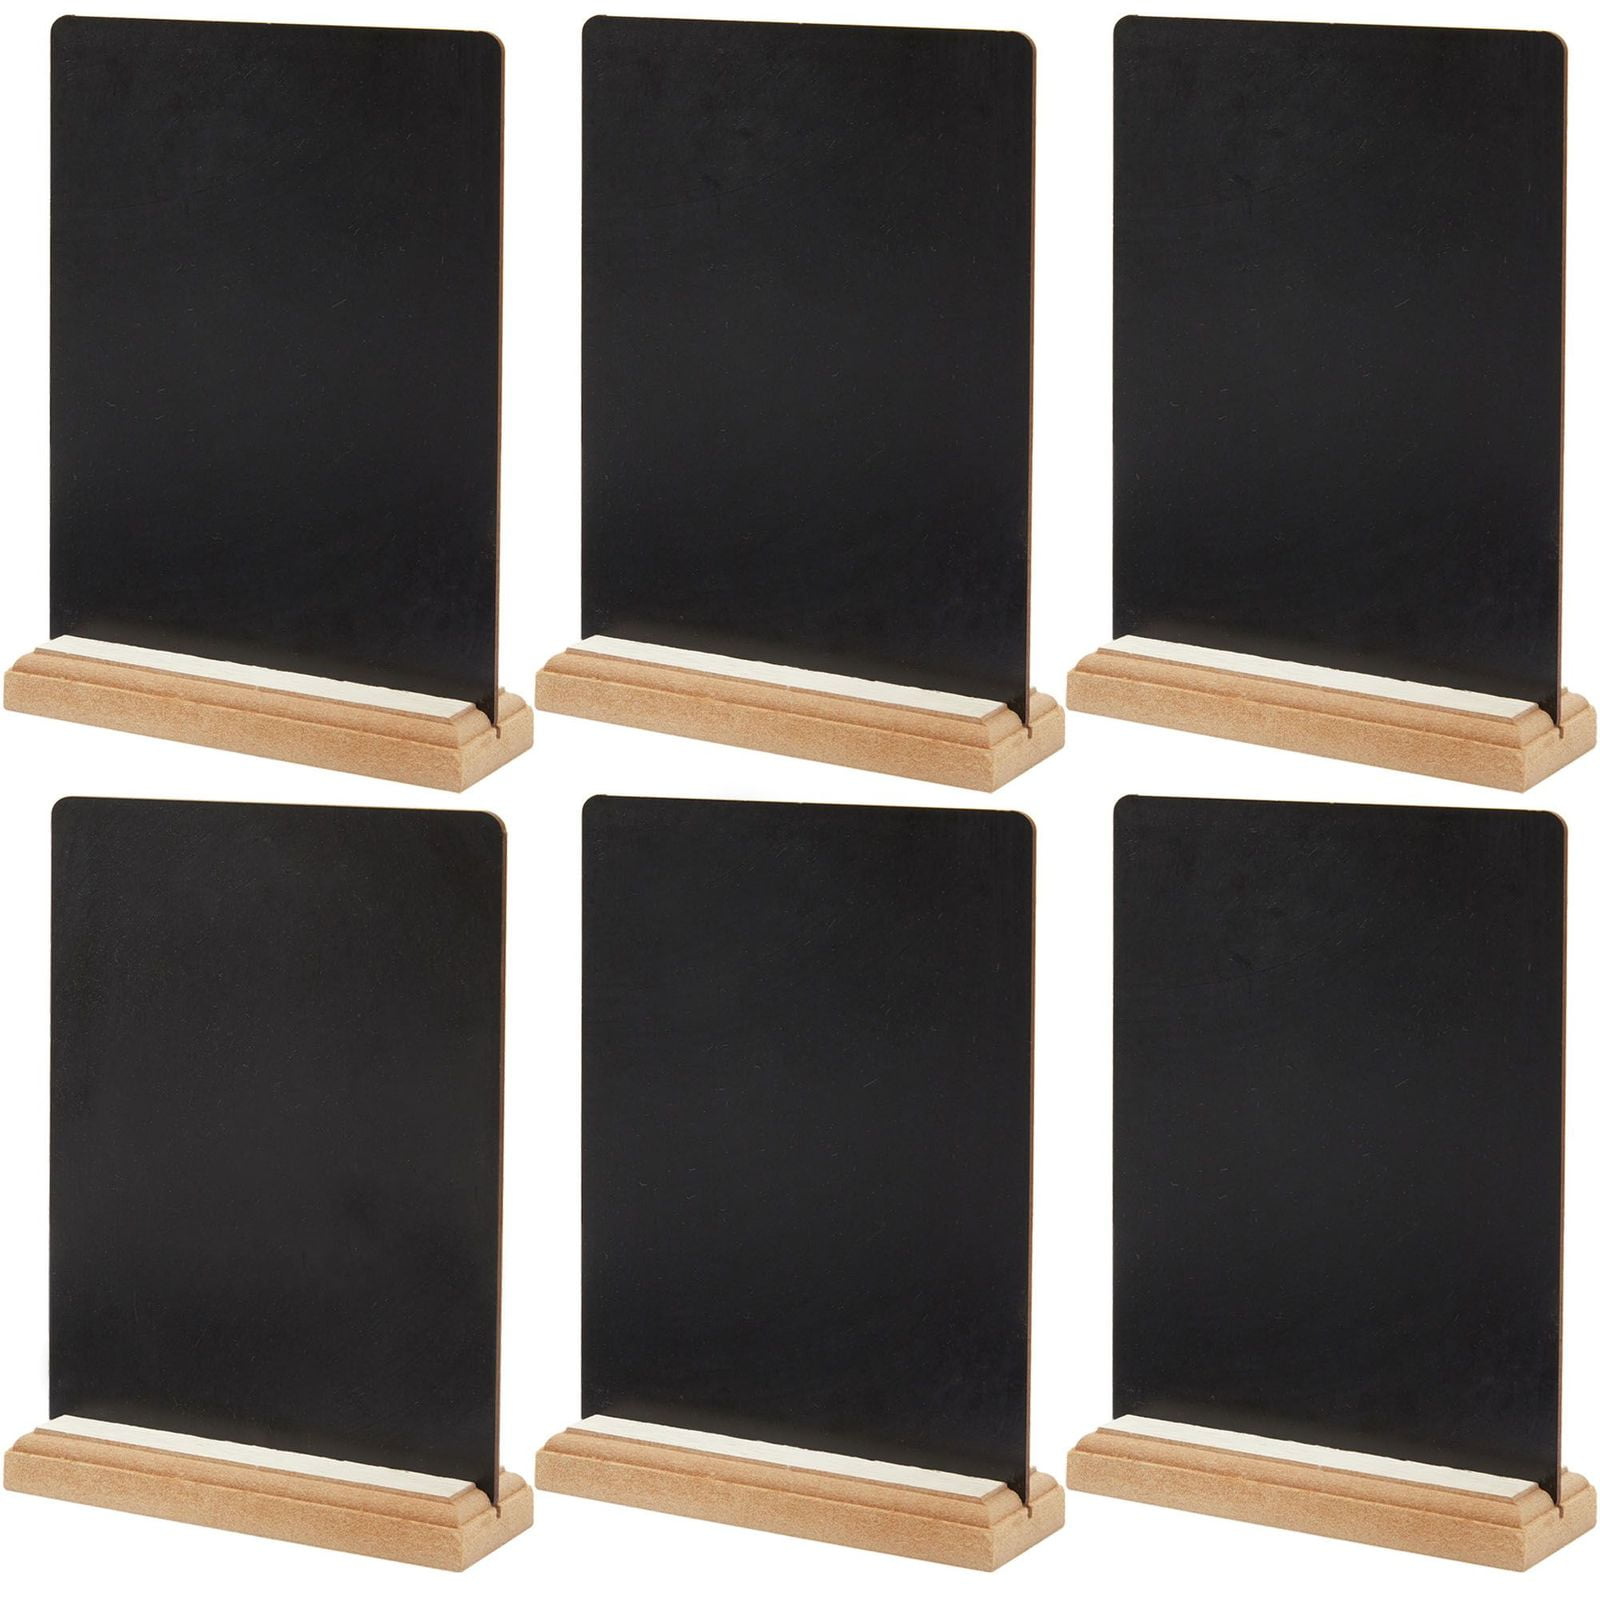 Mini Decorative Chalkboard with White Frame Pack of 6 